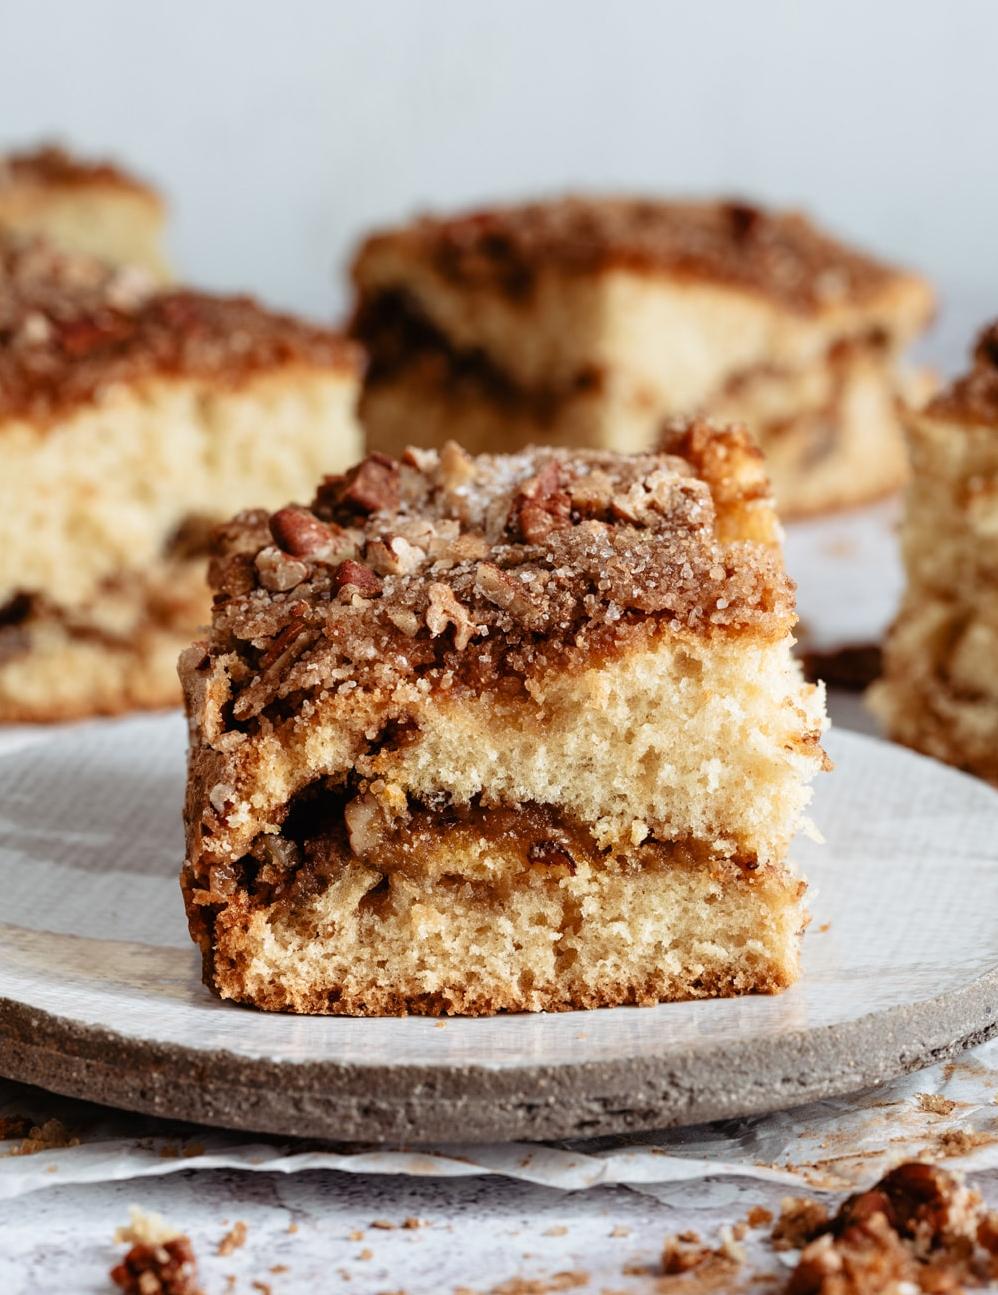  Your taste buds are in for a treat with this Cream Coffee Cake!